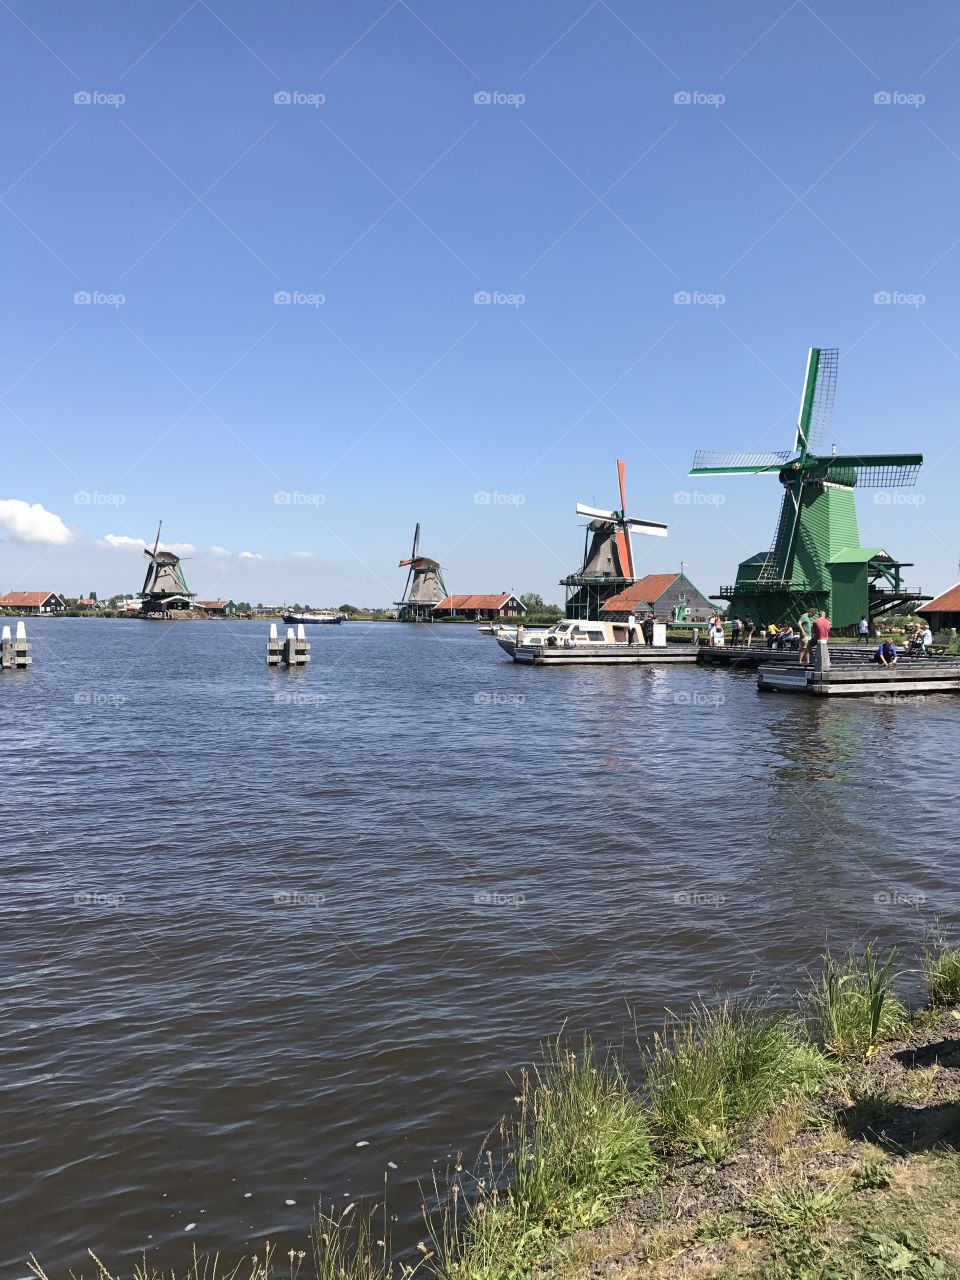 Water
Windmills 
Old
History 
Netherlands 